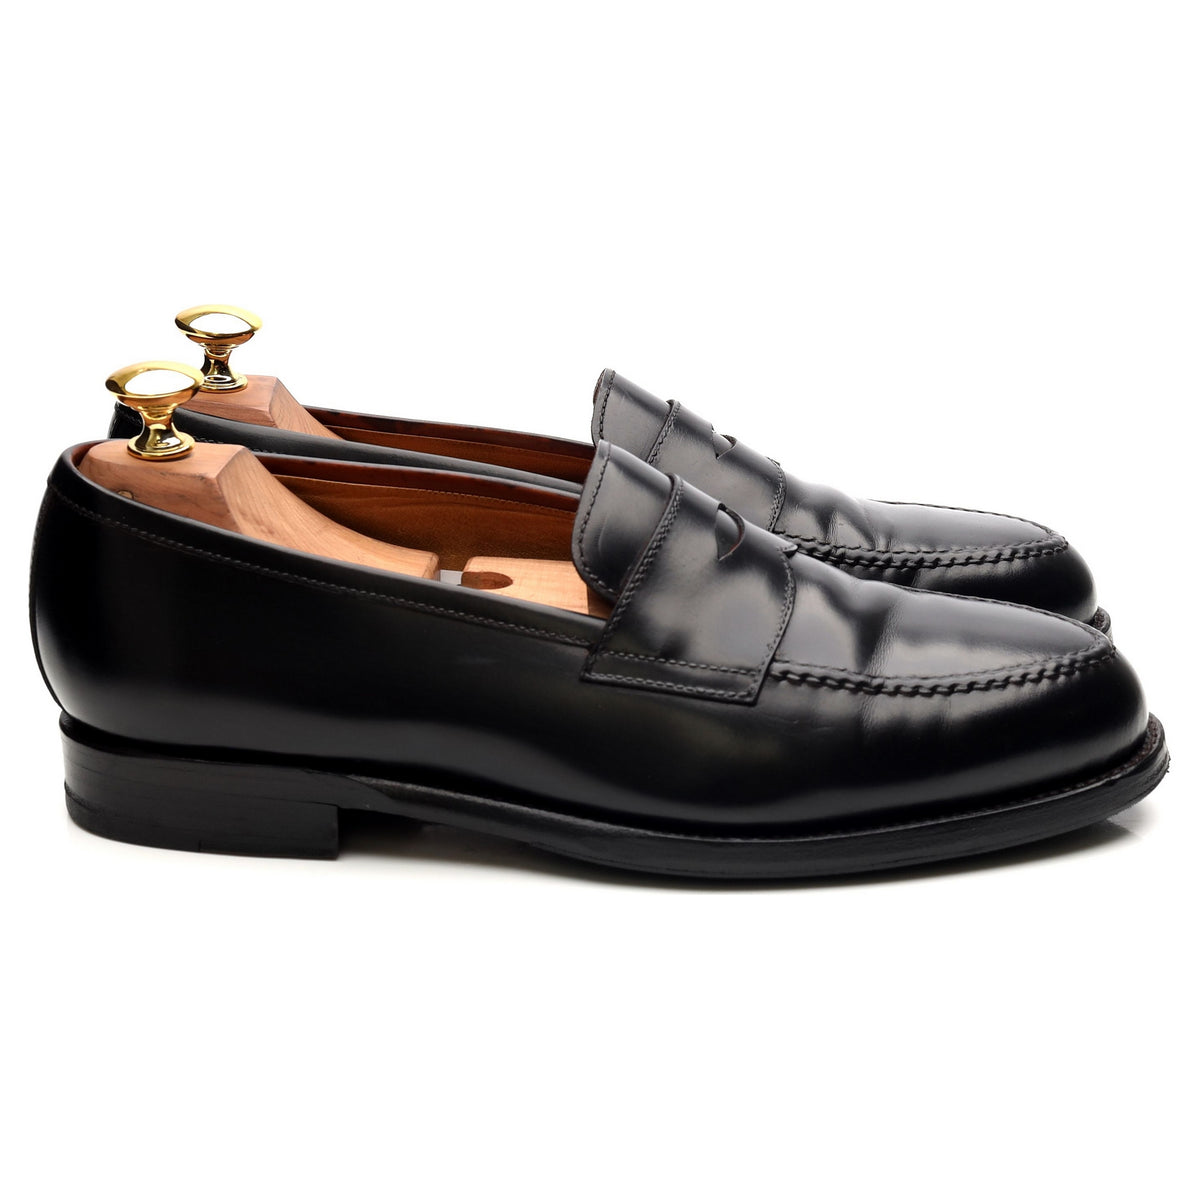 Black Leather Loafers UK 6.5